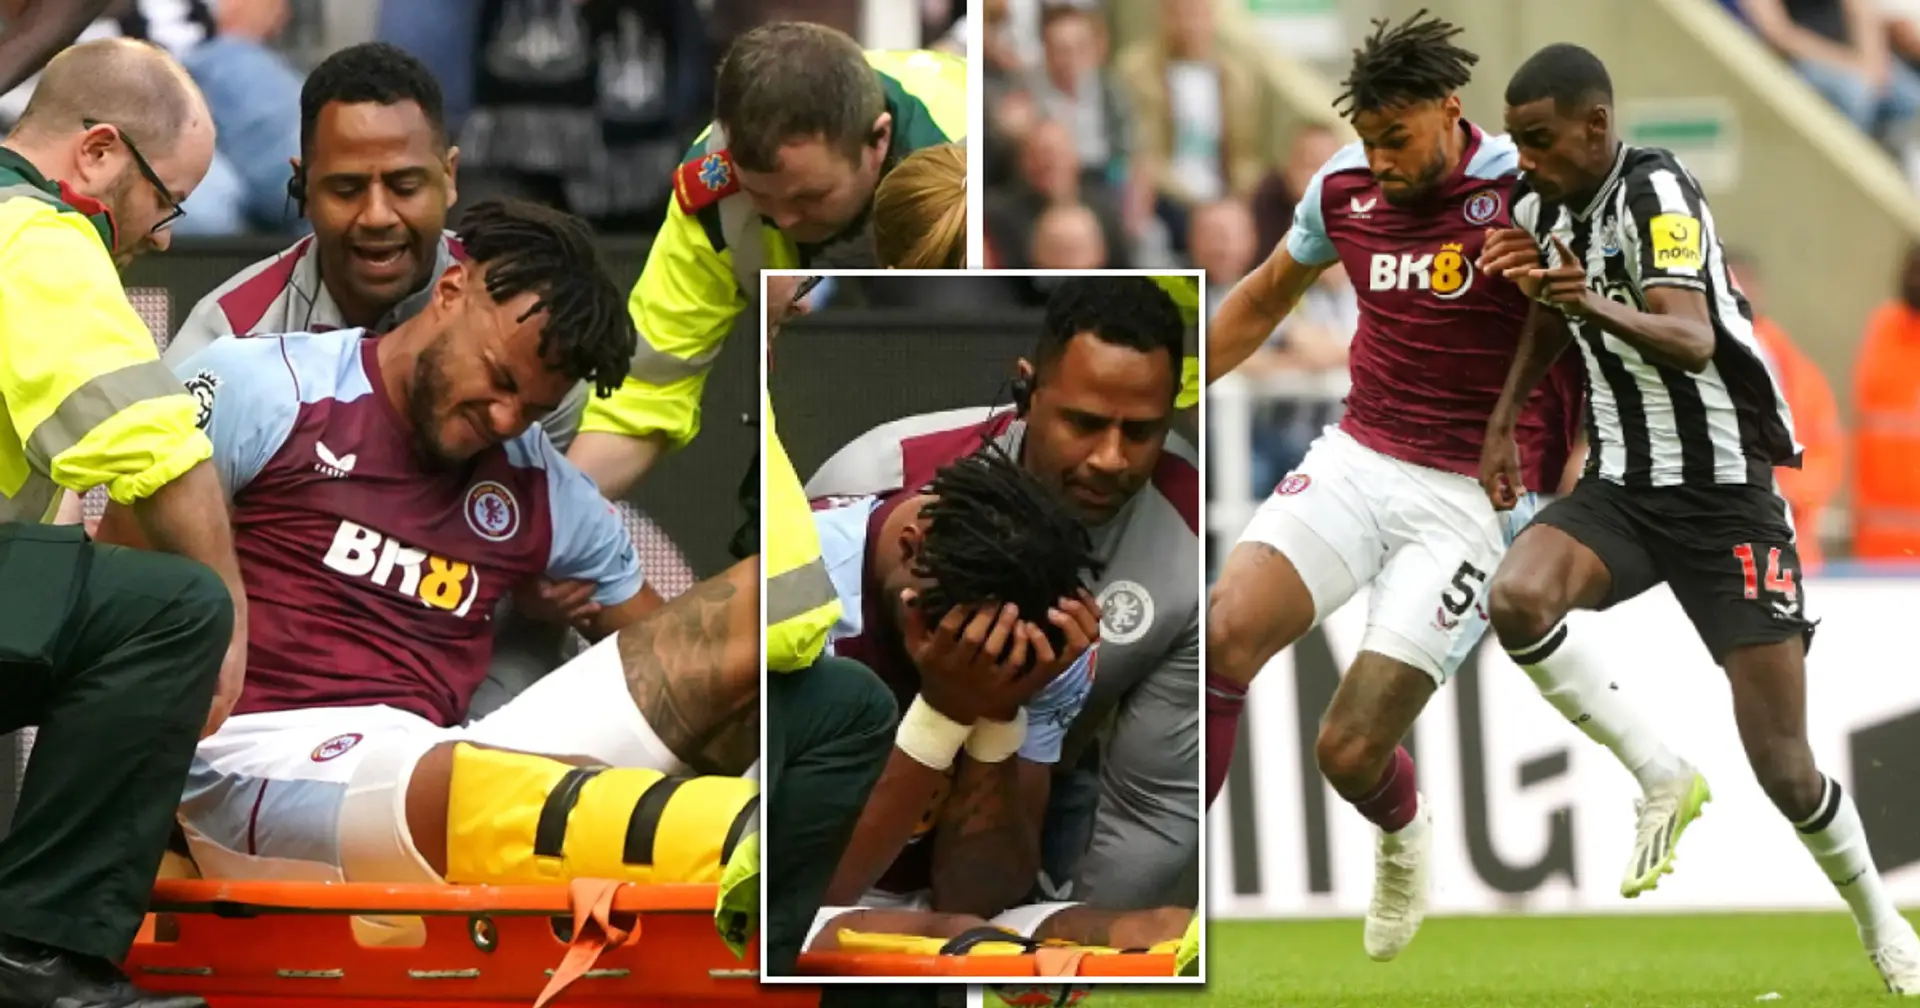 Aston Villa defender Tyrone Mings is set to miss the majority of the season after damaging knee